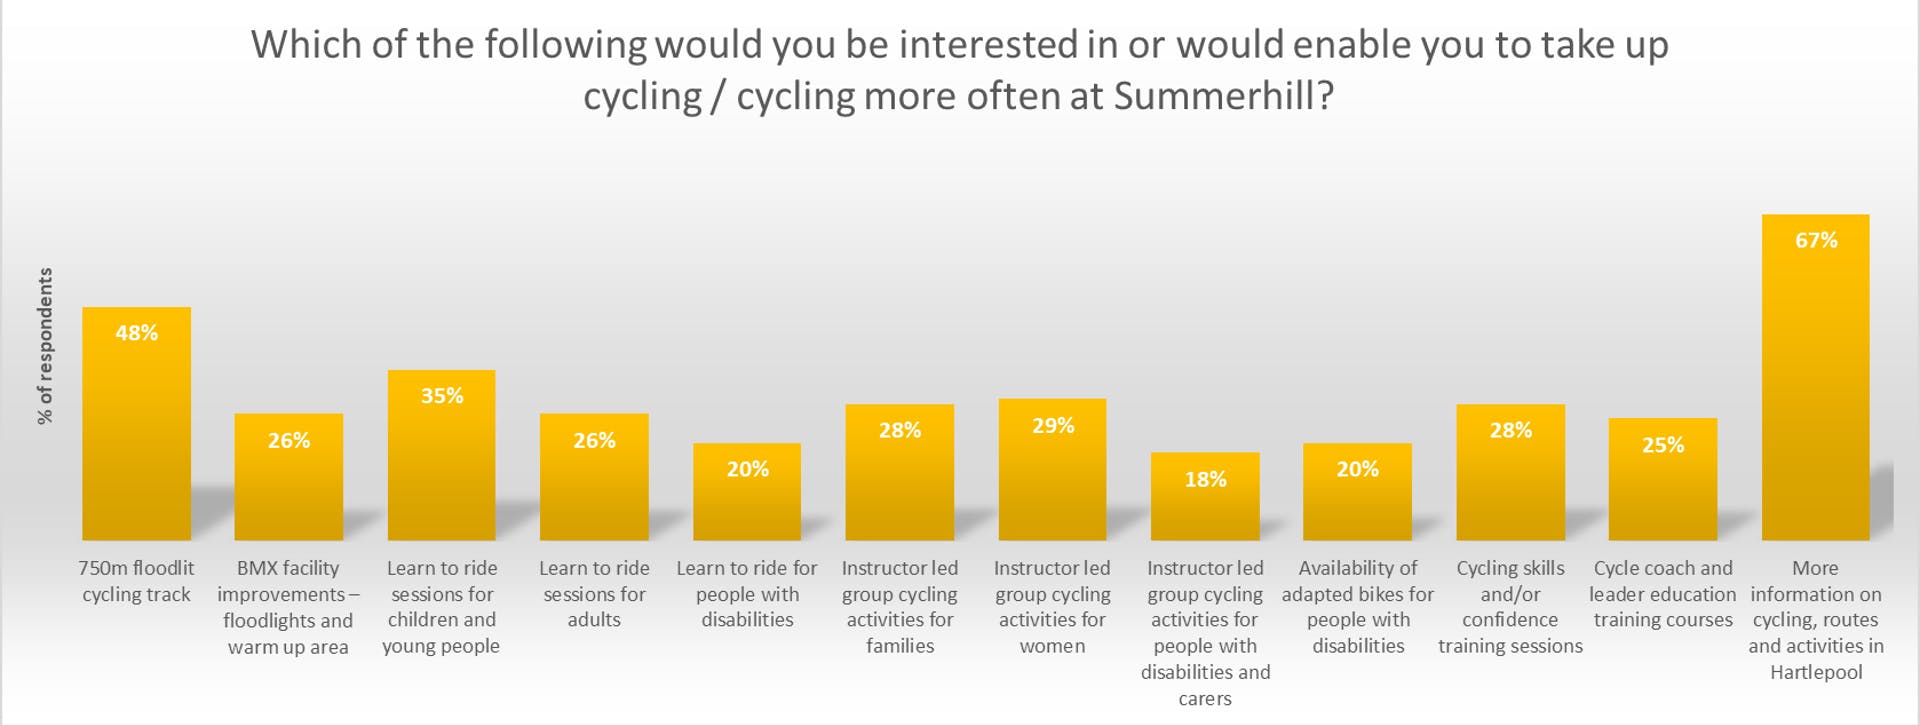 What facilities at Summerhill would enable you to take up cycling / cycle more often?